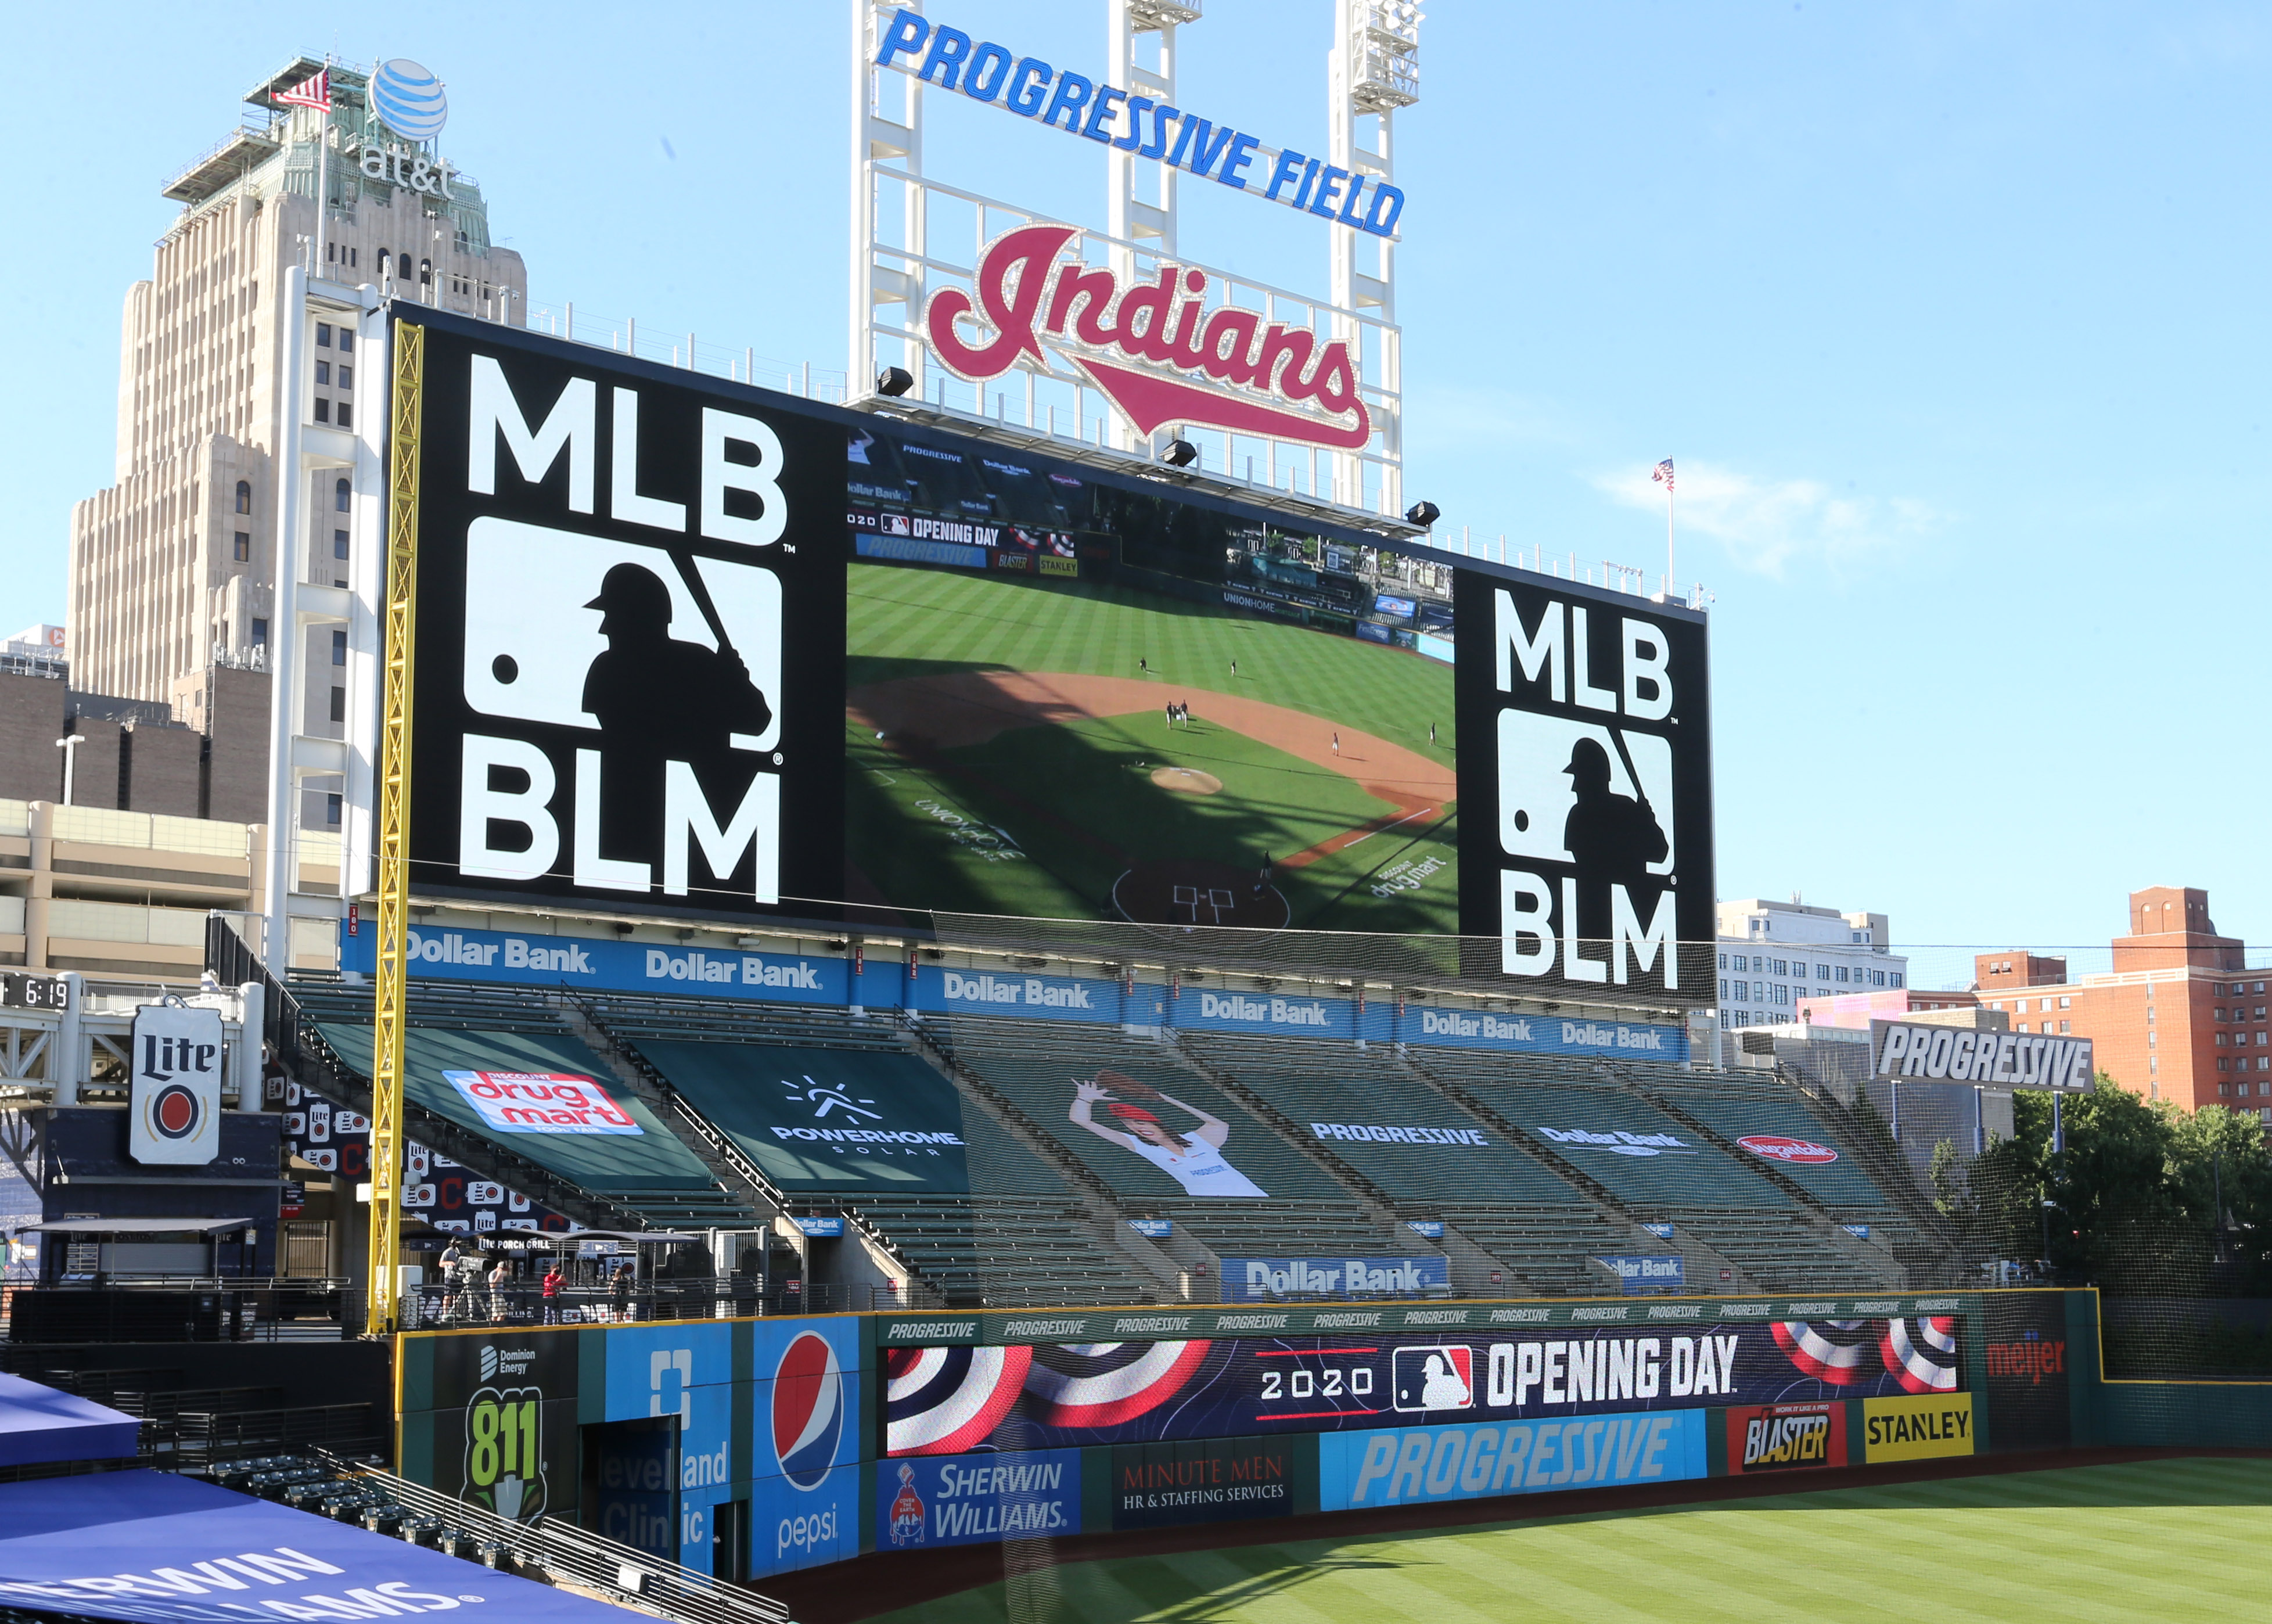 4 Potential Team Name Options for the Cleveland Indians